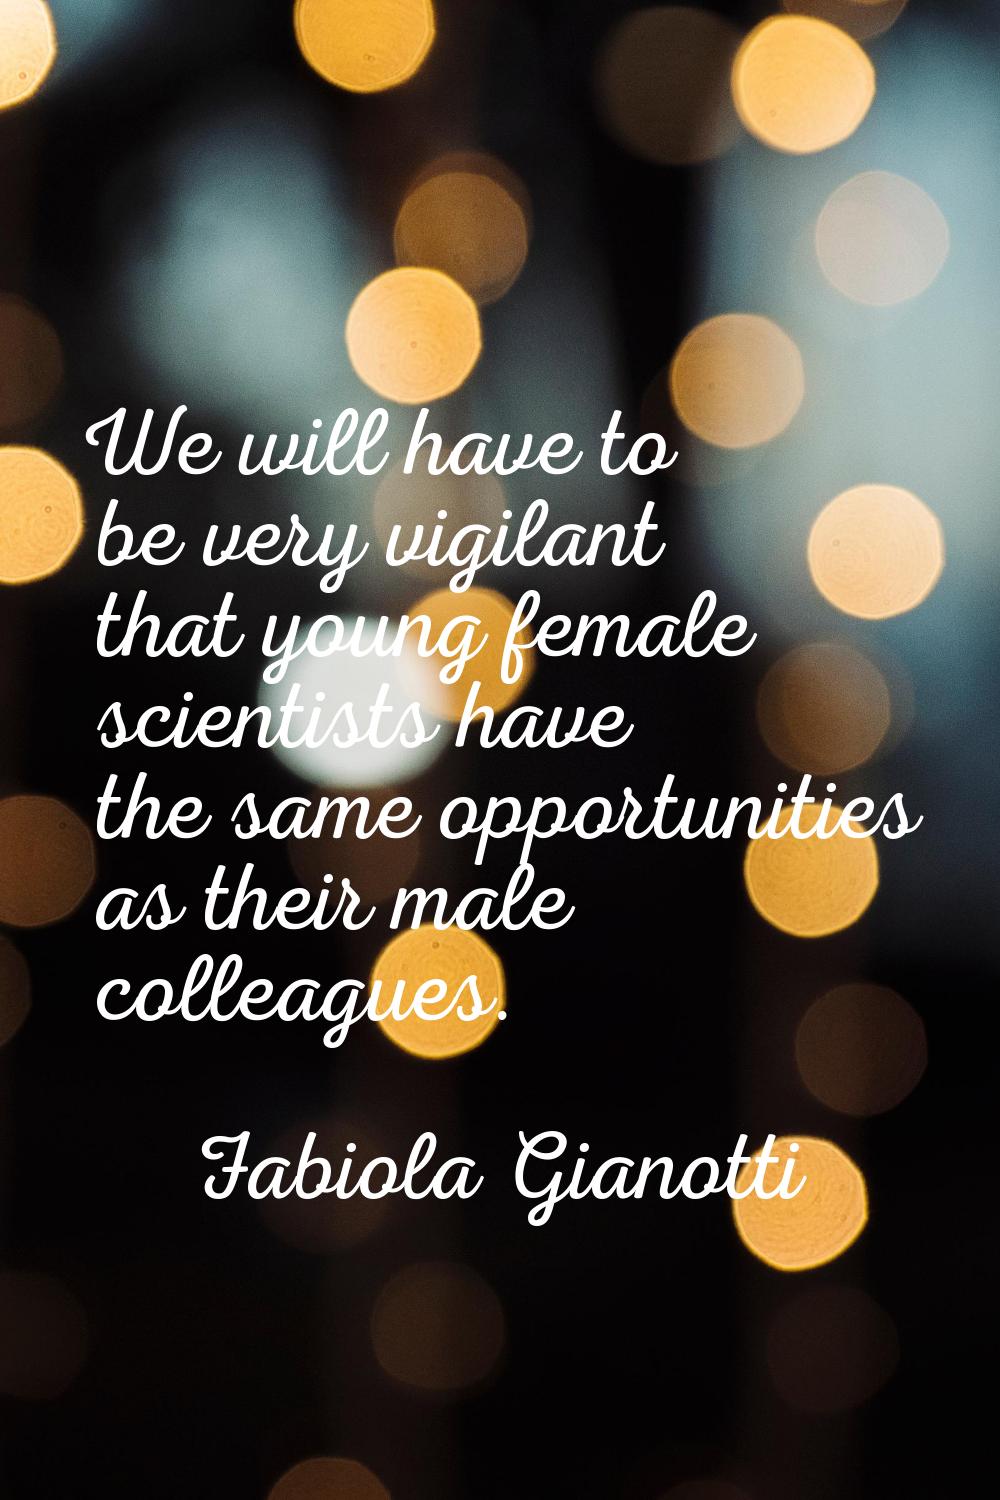 We will have to be very vigilant that young female scientists have the same opportunities as their 